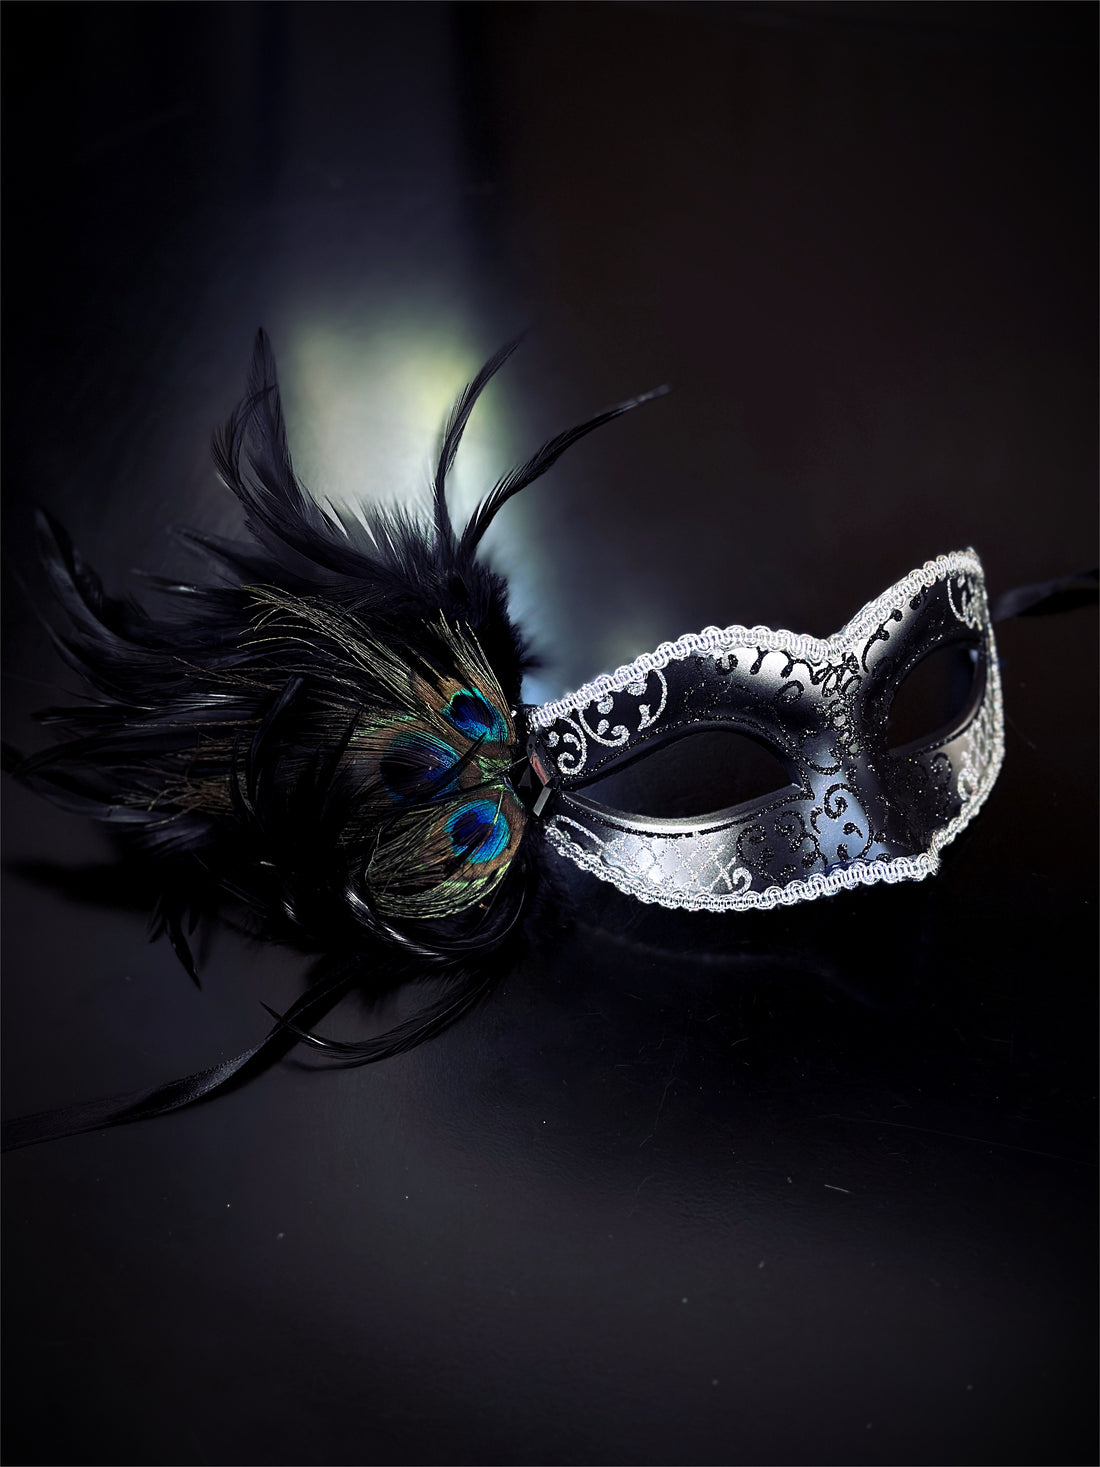 Womens black/silver masquerade mask with glitter and peacock feathers.